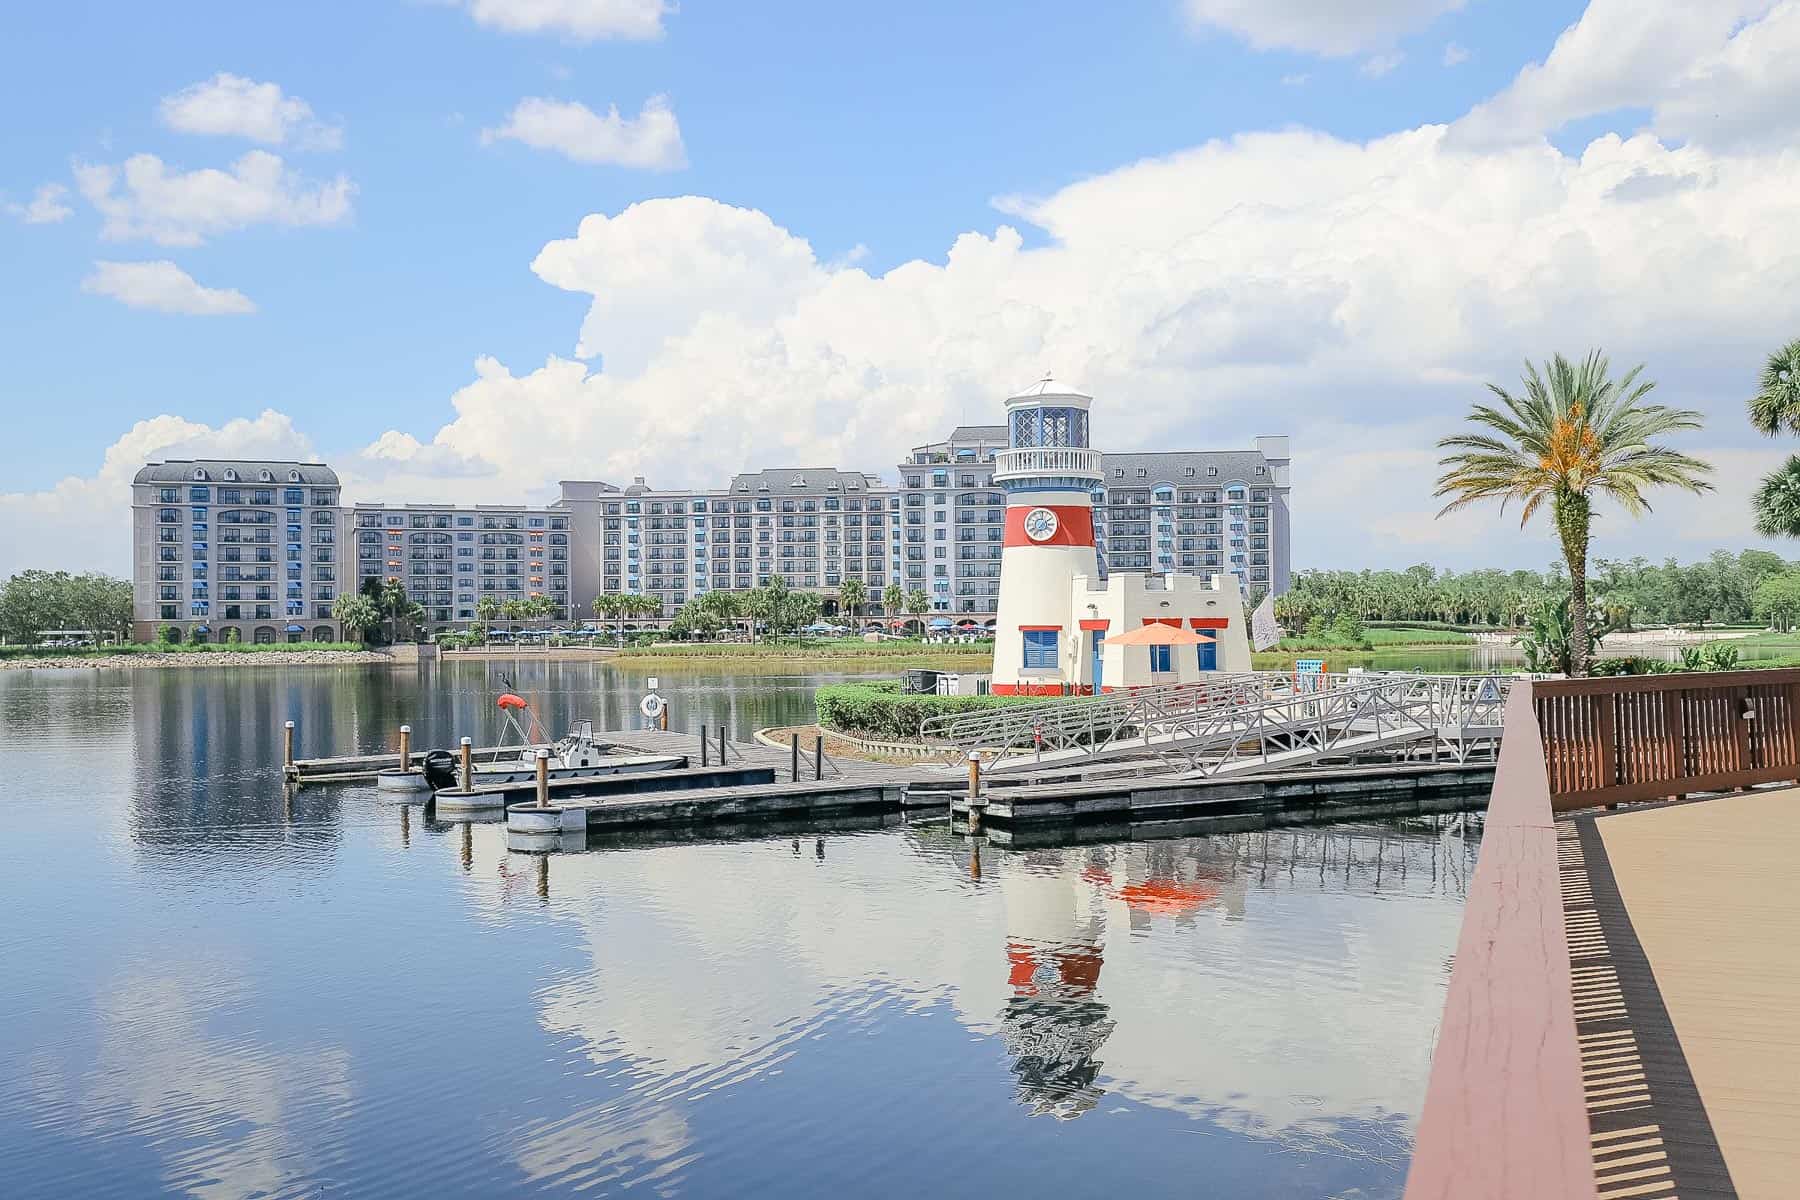 Disney's Riviera as seen from Disney's Caribbean example of two resort categories 